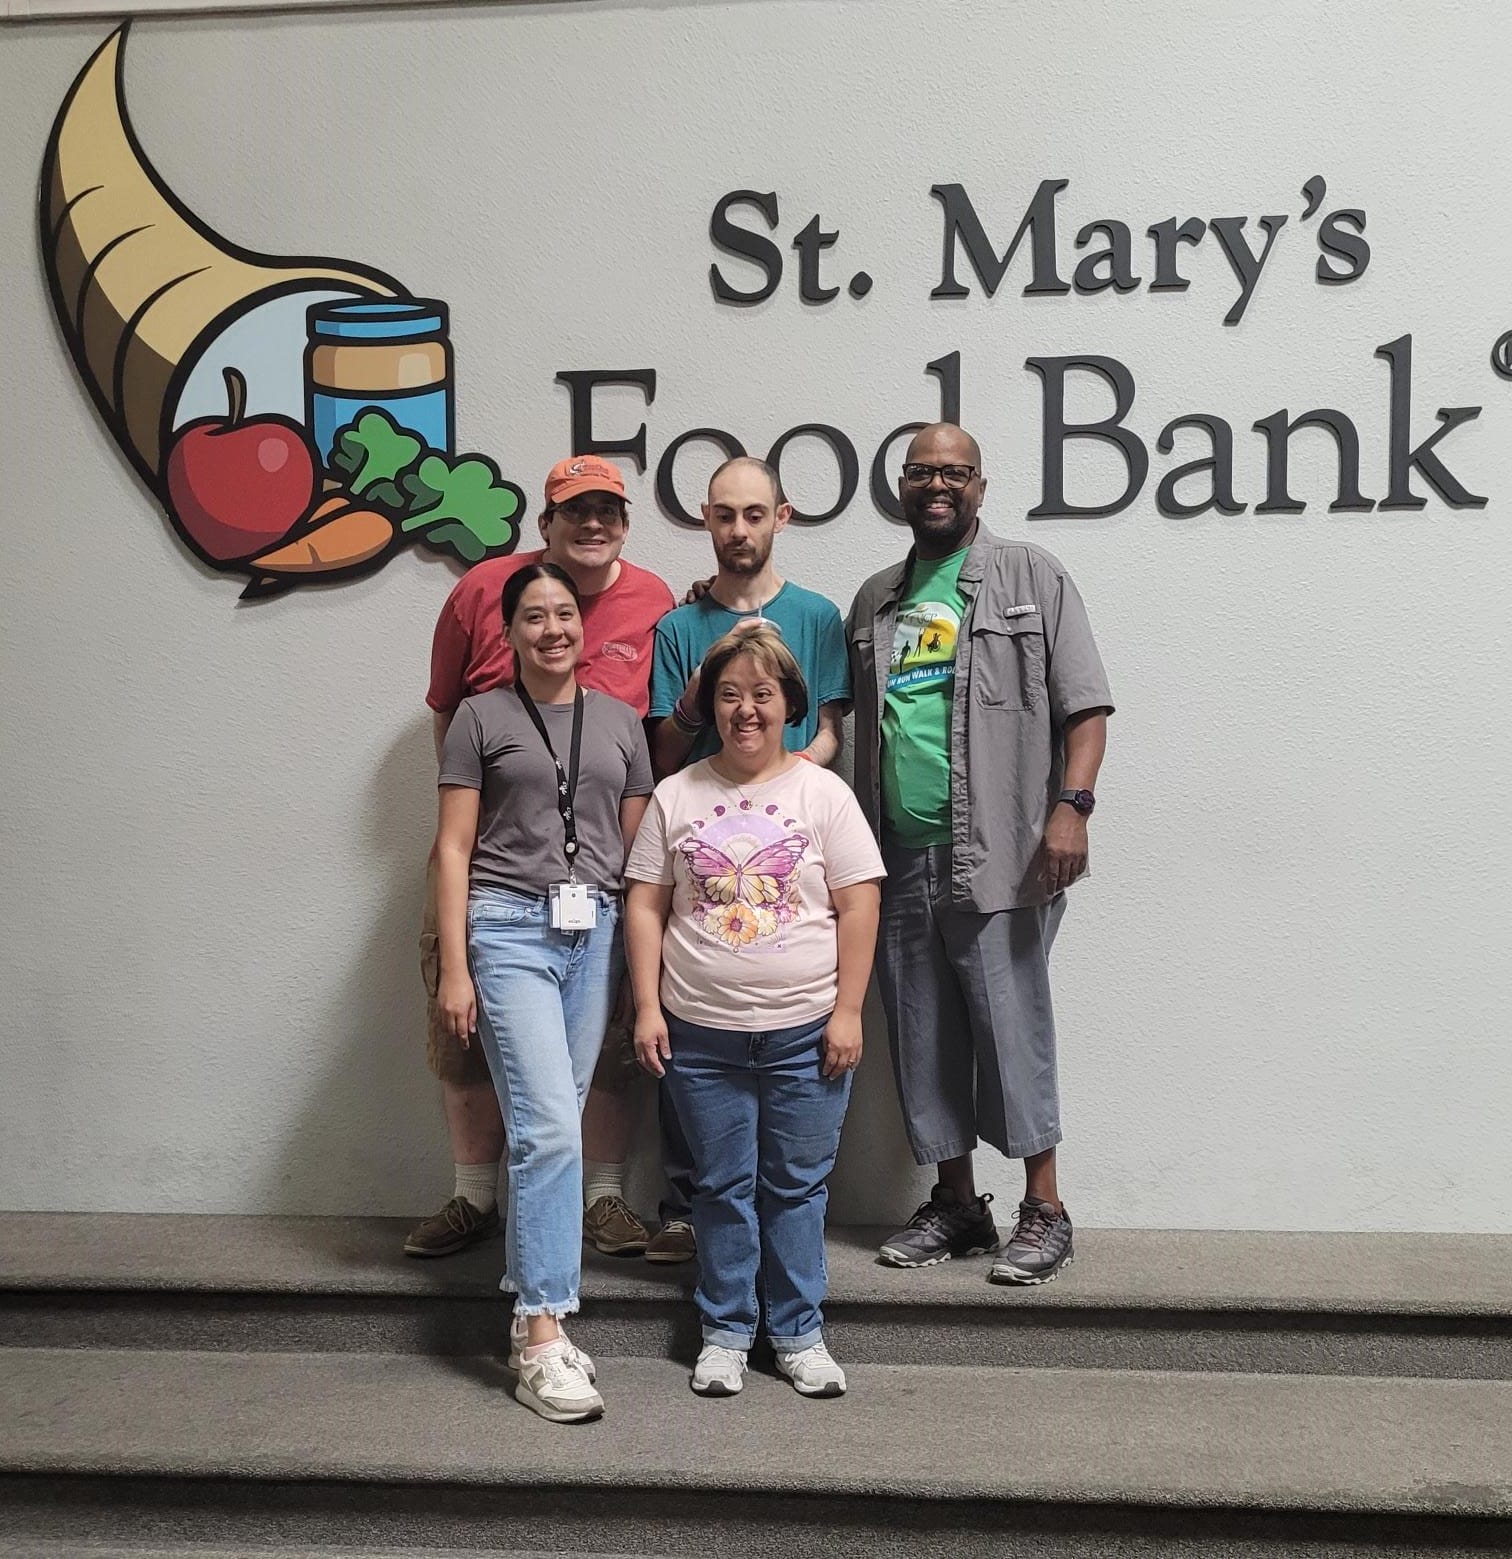 Five people stand in front of a wall with the logo and text "St. Mary's Food Bank." The group appears to be posing for a photo, with one member proudly displaying an AAC communication device.